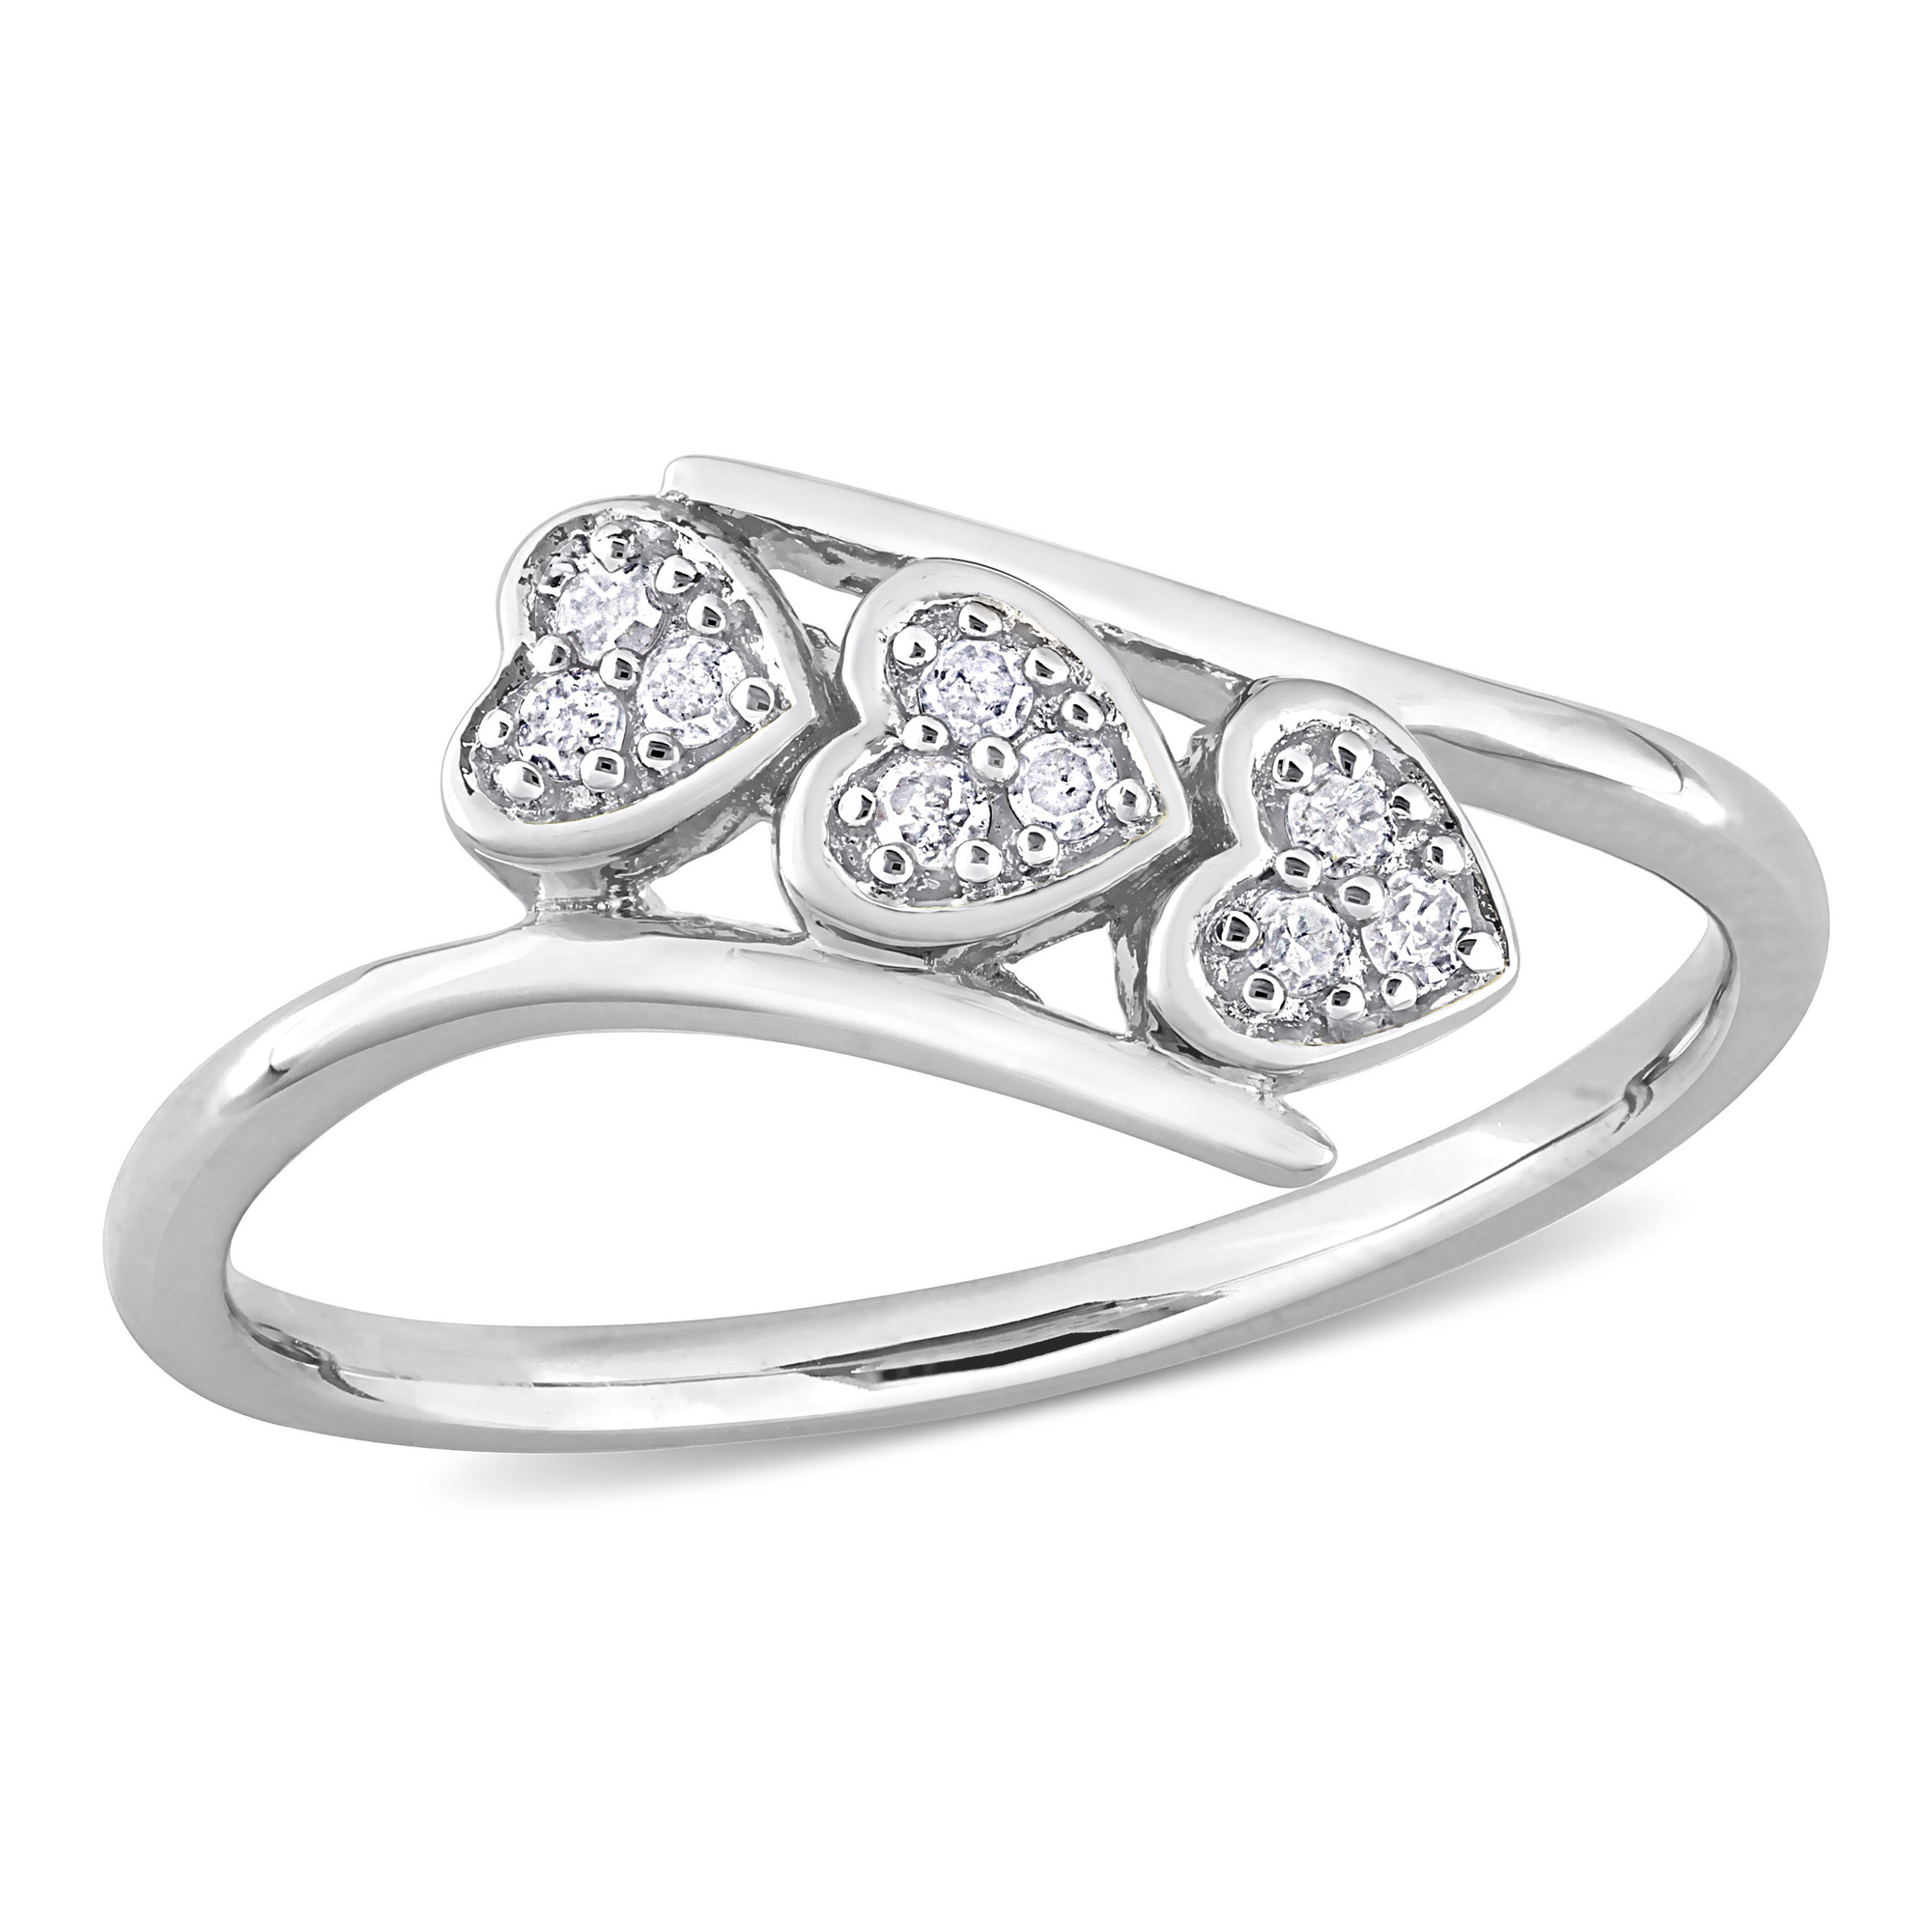 1/10ctw Diamond Triple Heart Sterling Silver Bypass Promise Ring - Size 10 -  REEDS, RDJ005621-1000